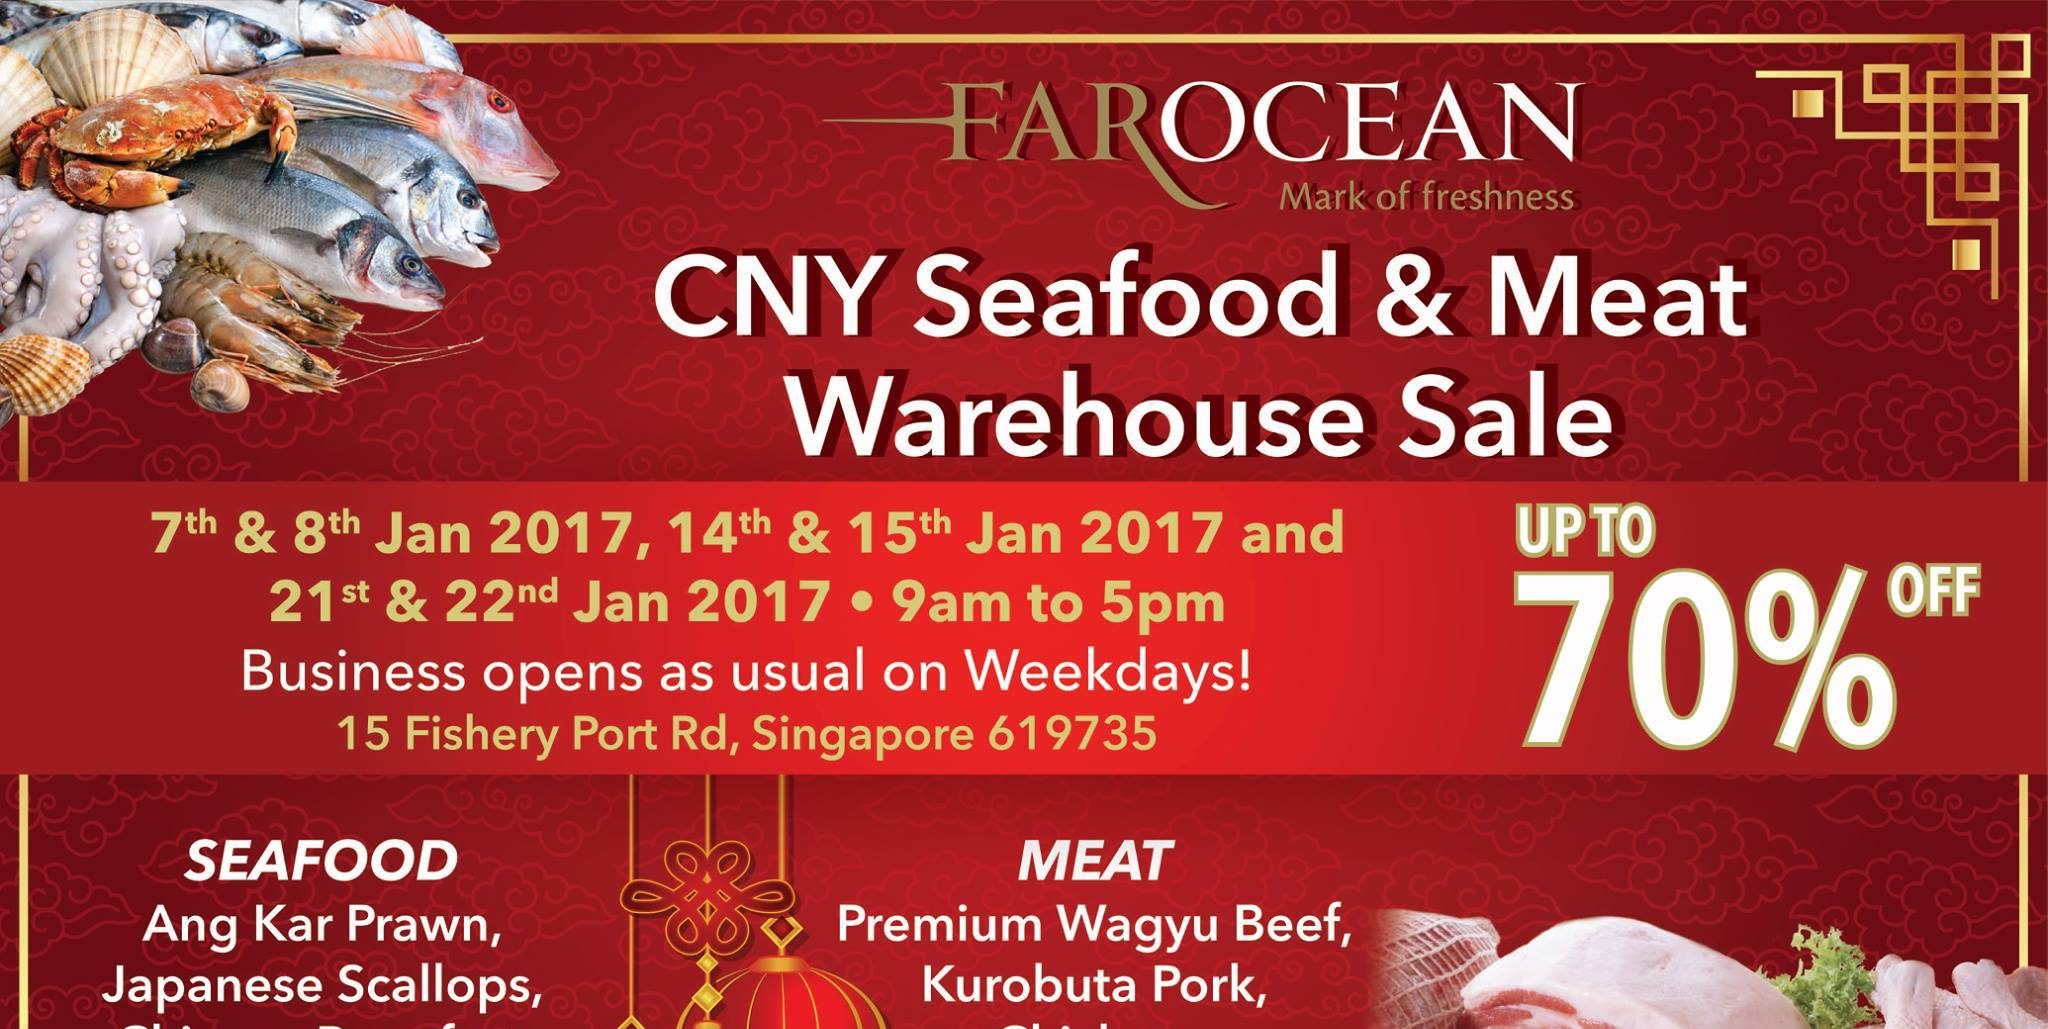 Farocean Singapore CNY Seafood & Meat Warehouse Sale Up to 70% Off Promotion 7-22 Jan 2017